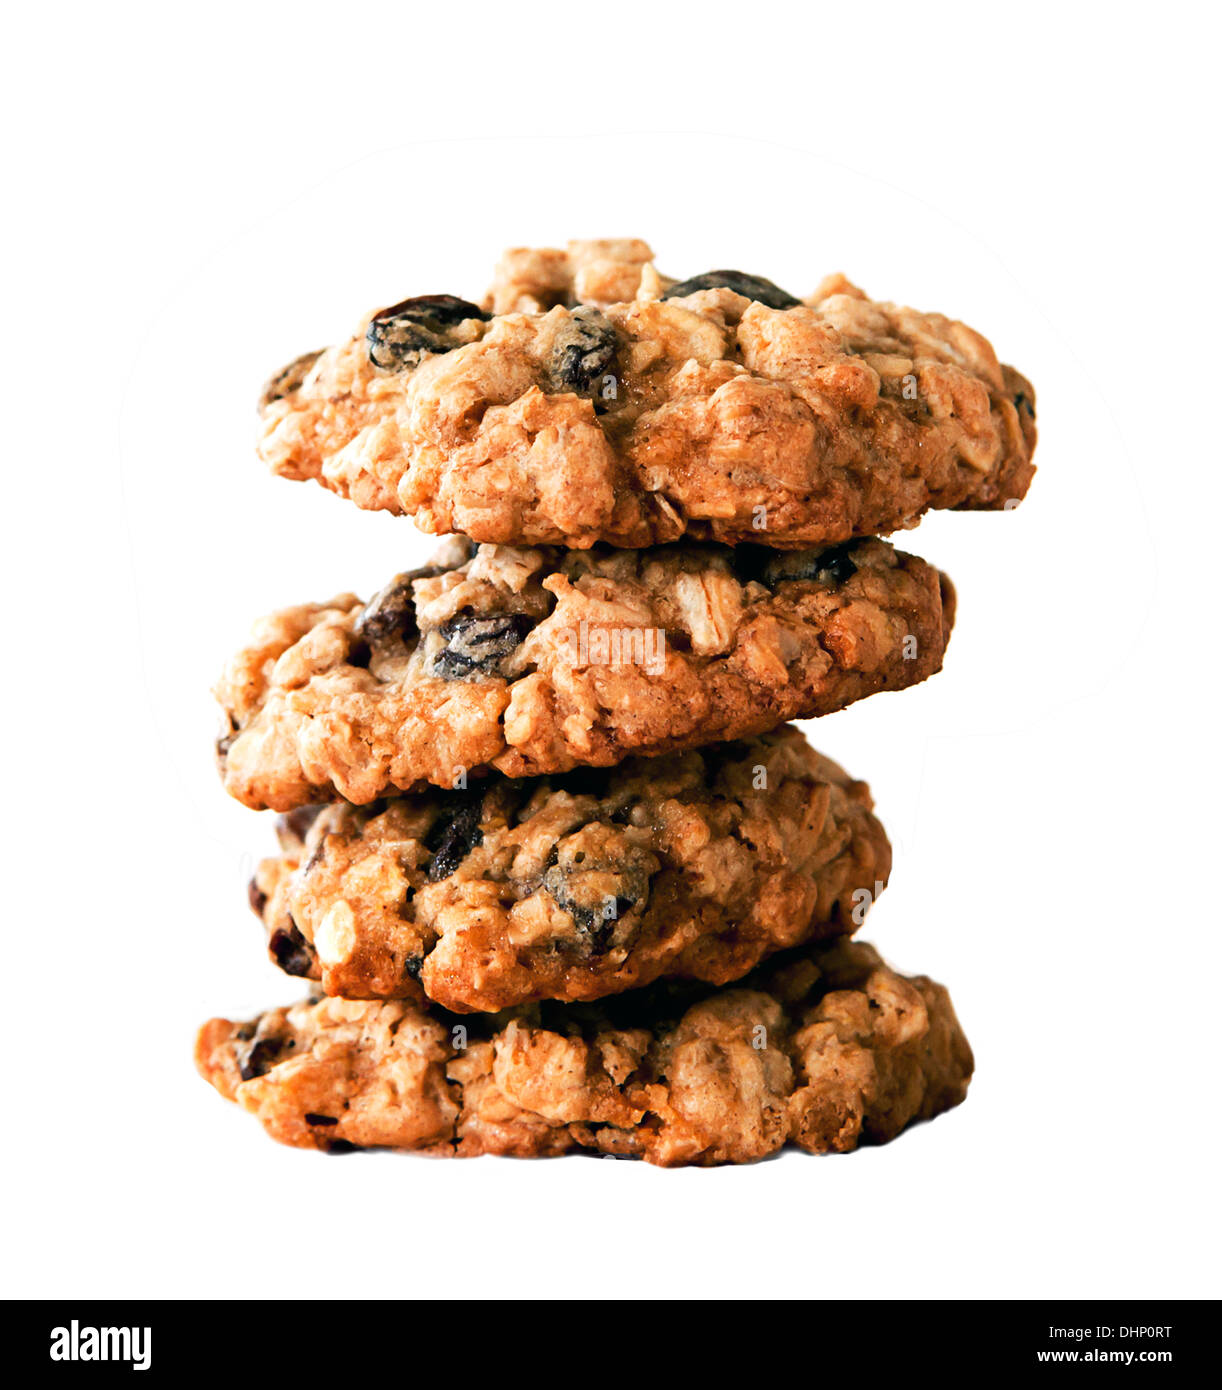 A studio shot of four oatmeal cookies stacked Stock Photo